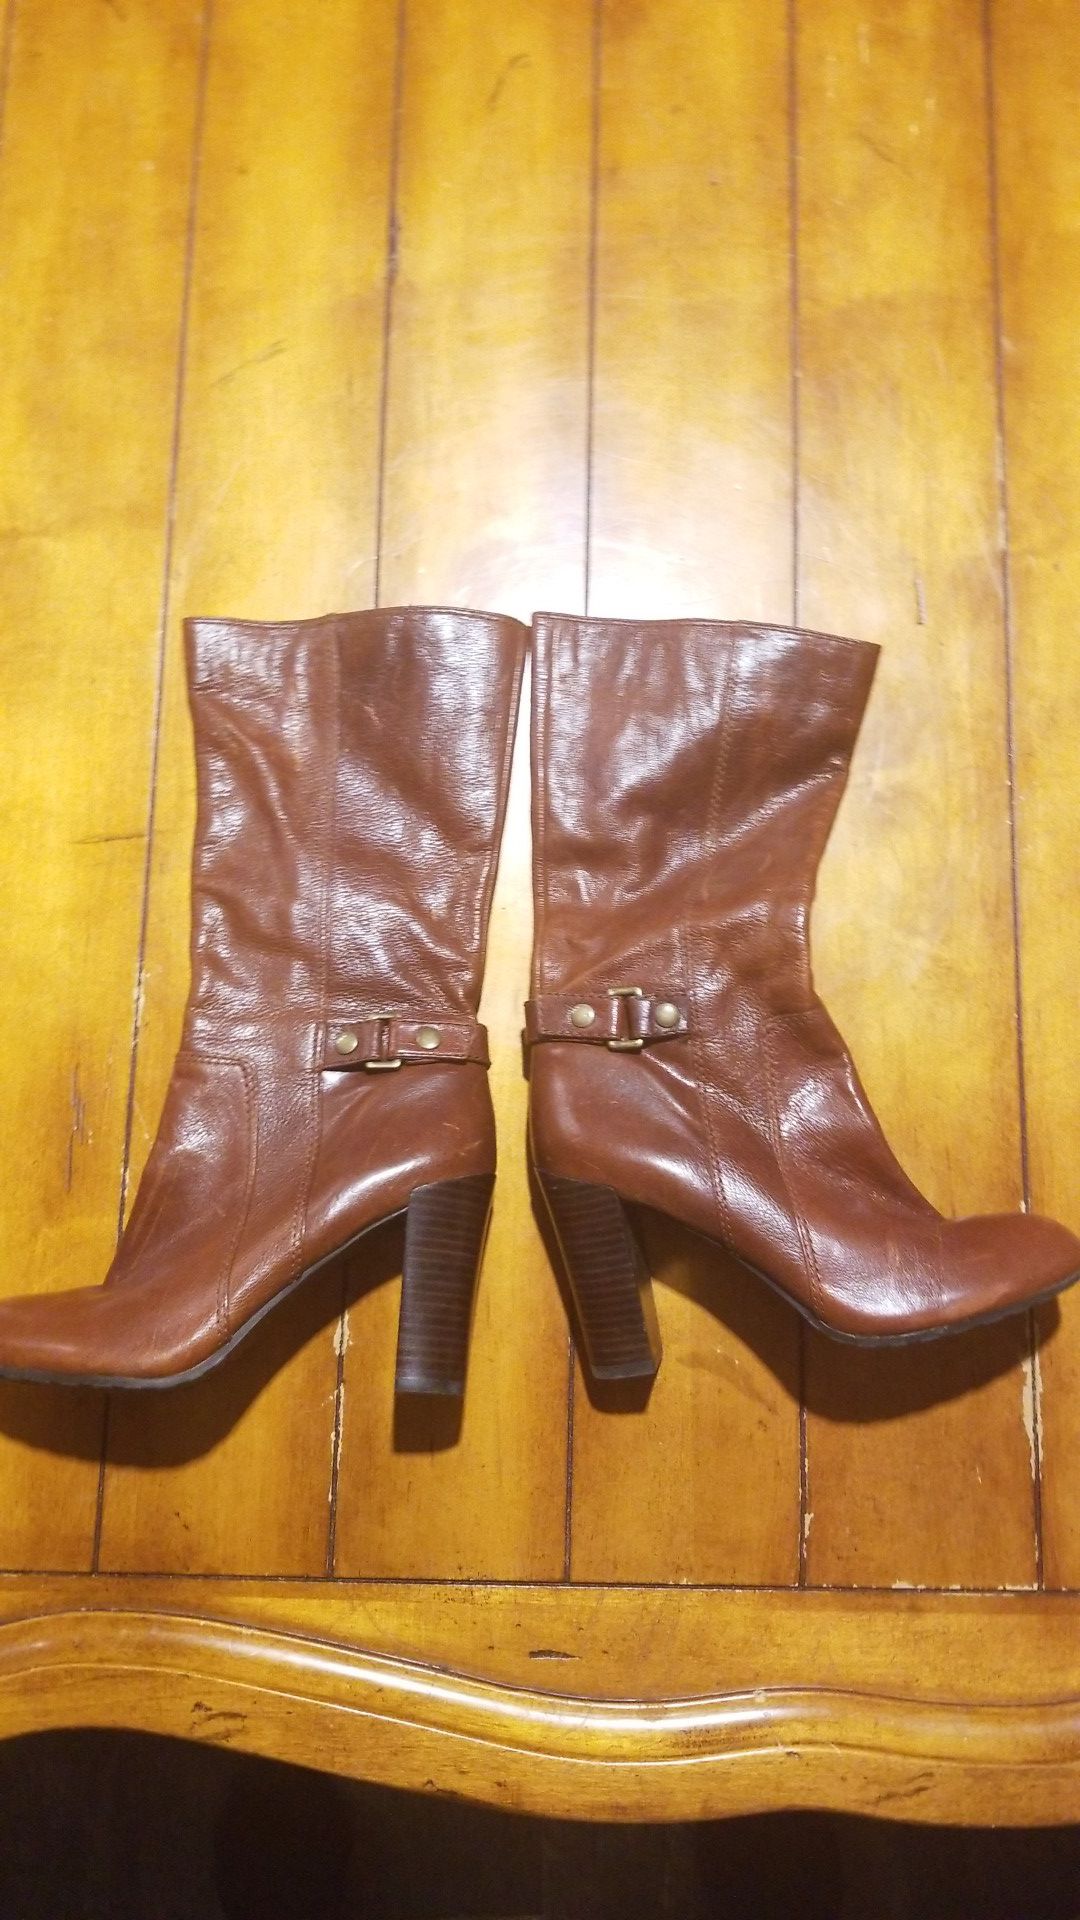 New size 7.5 women's brown leather boots nine west fall winter heels fashion